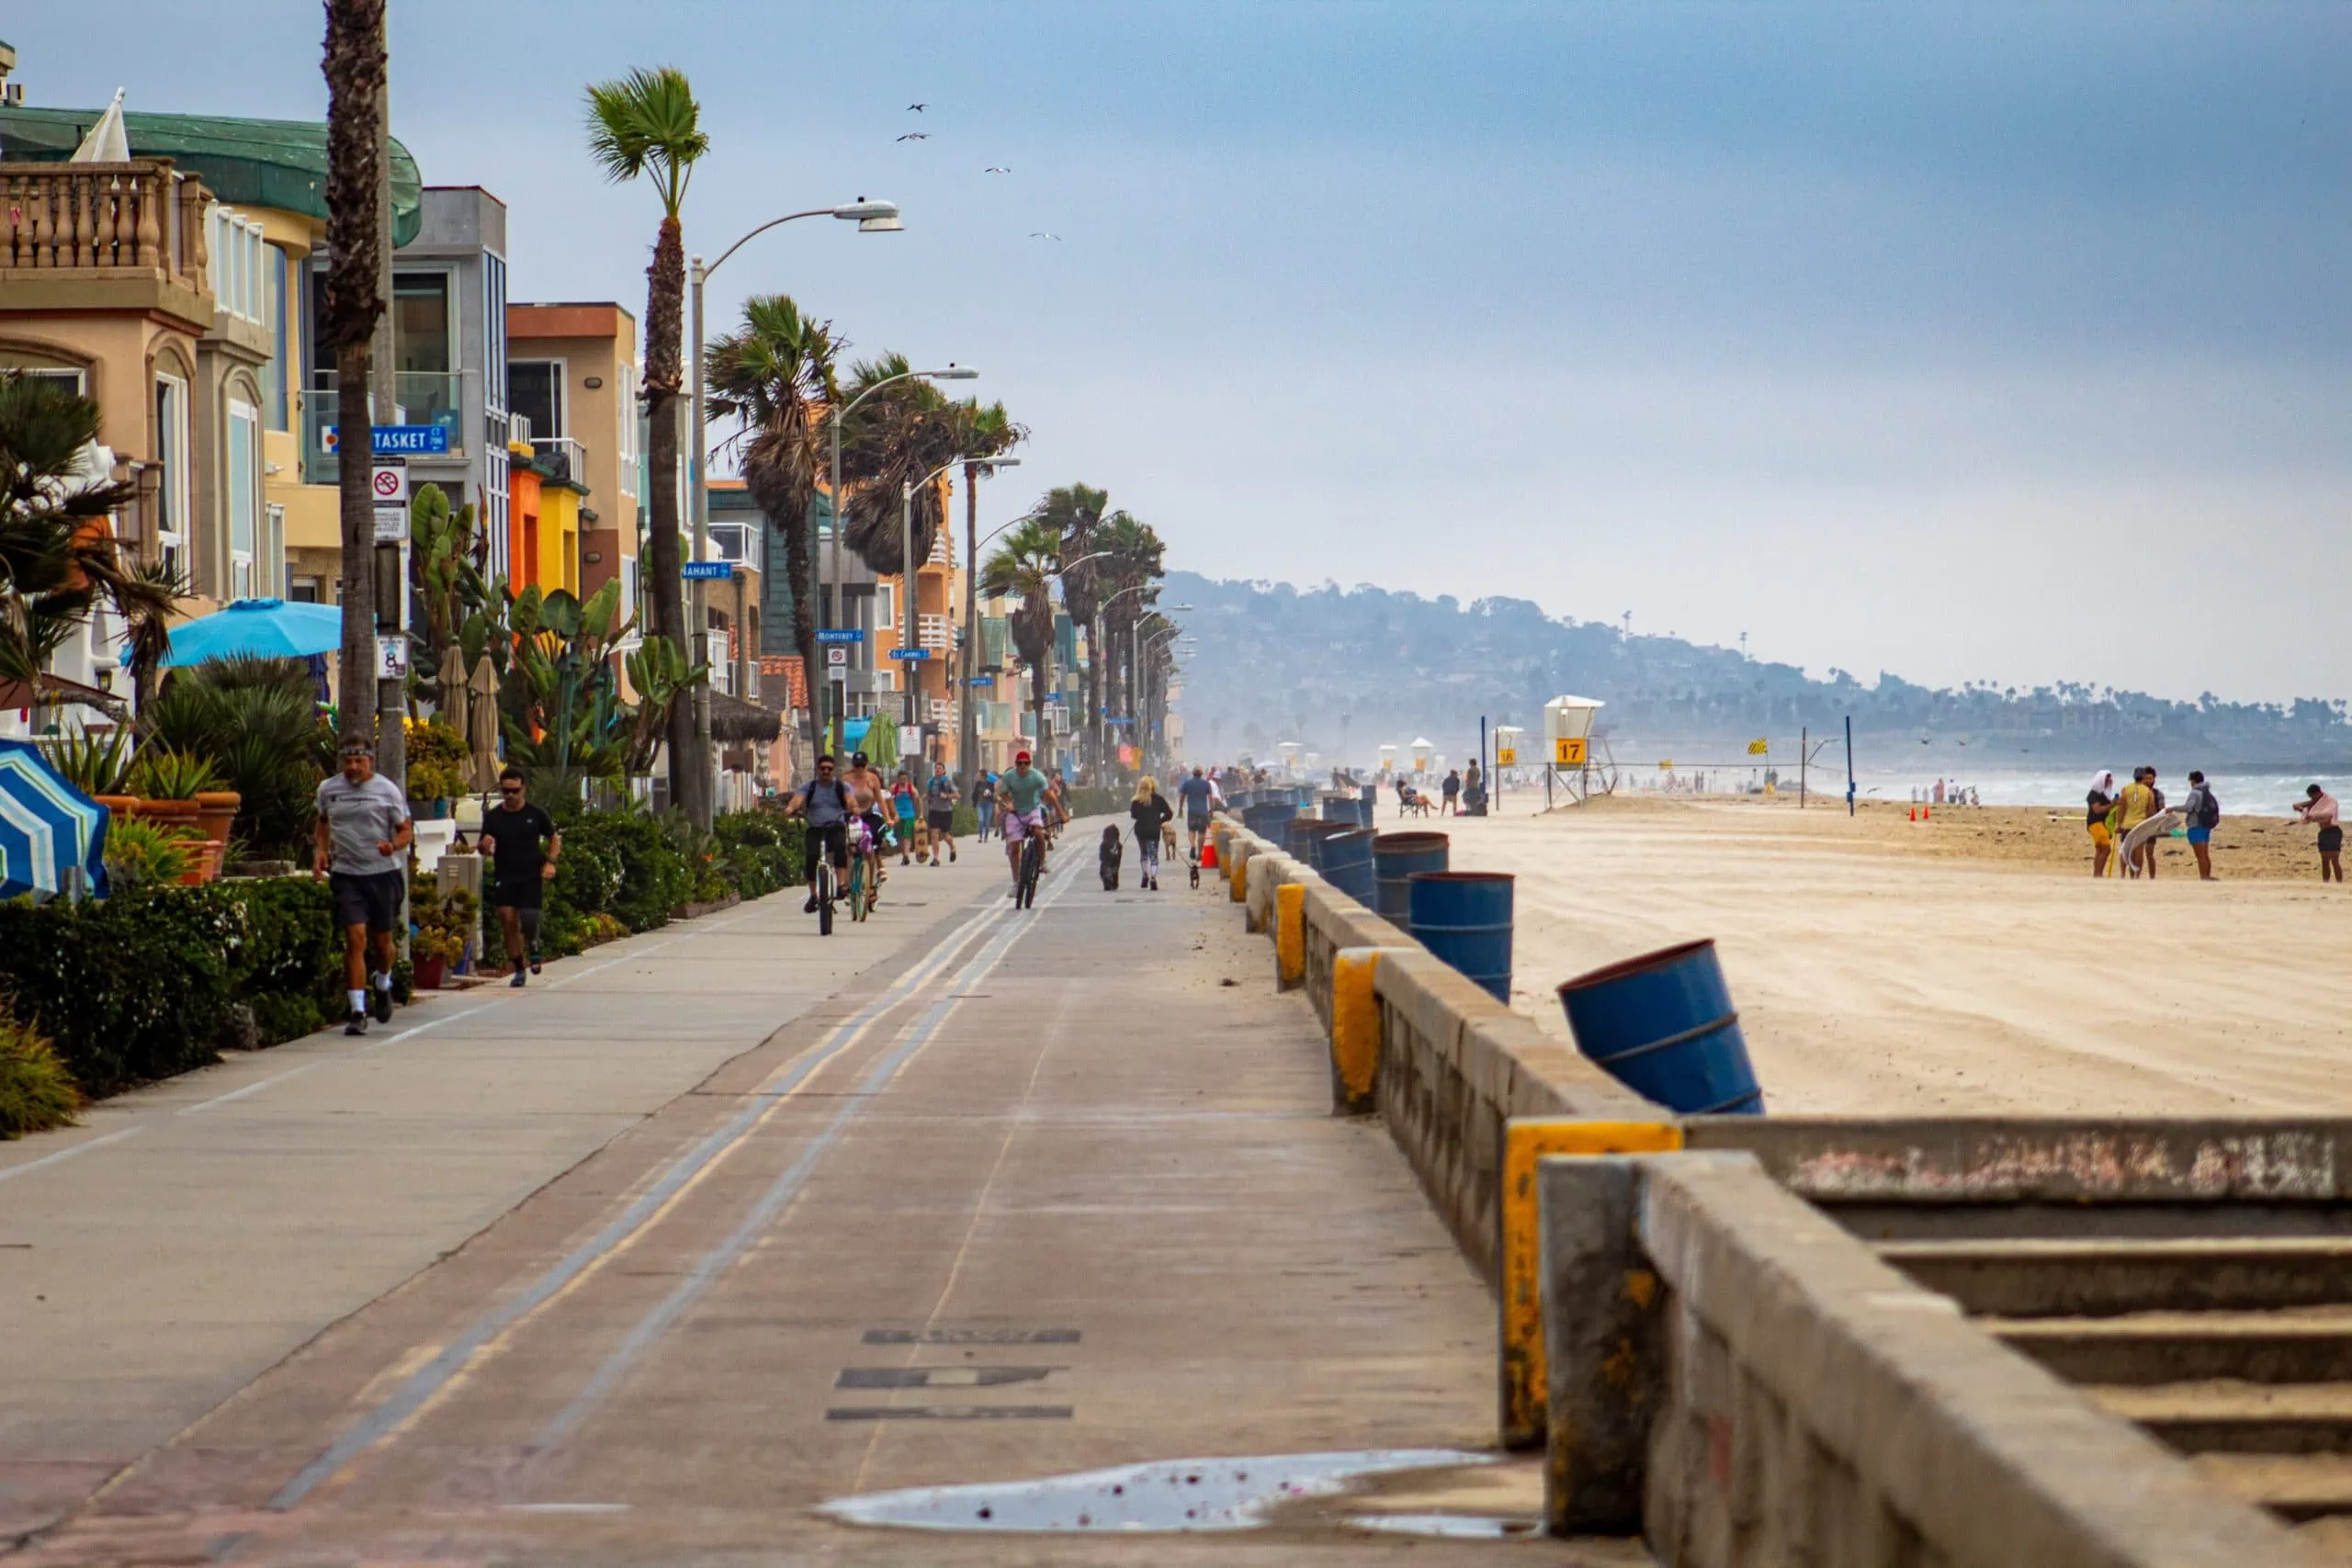 Boardwalk of San Diego beach with small businesses that are safeguard assets with security camera systems